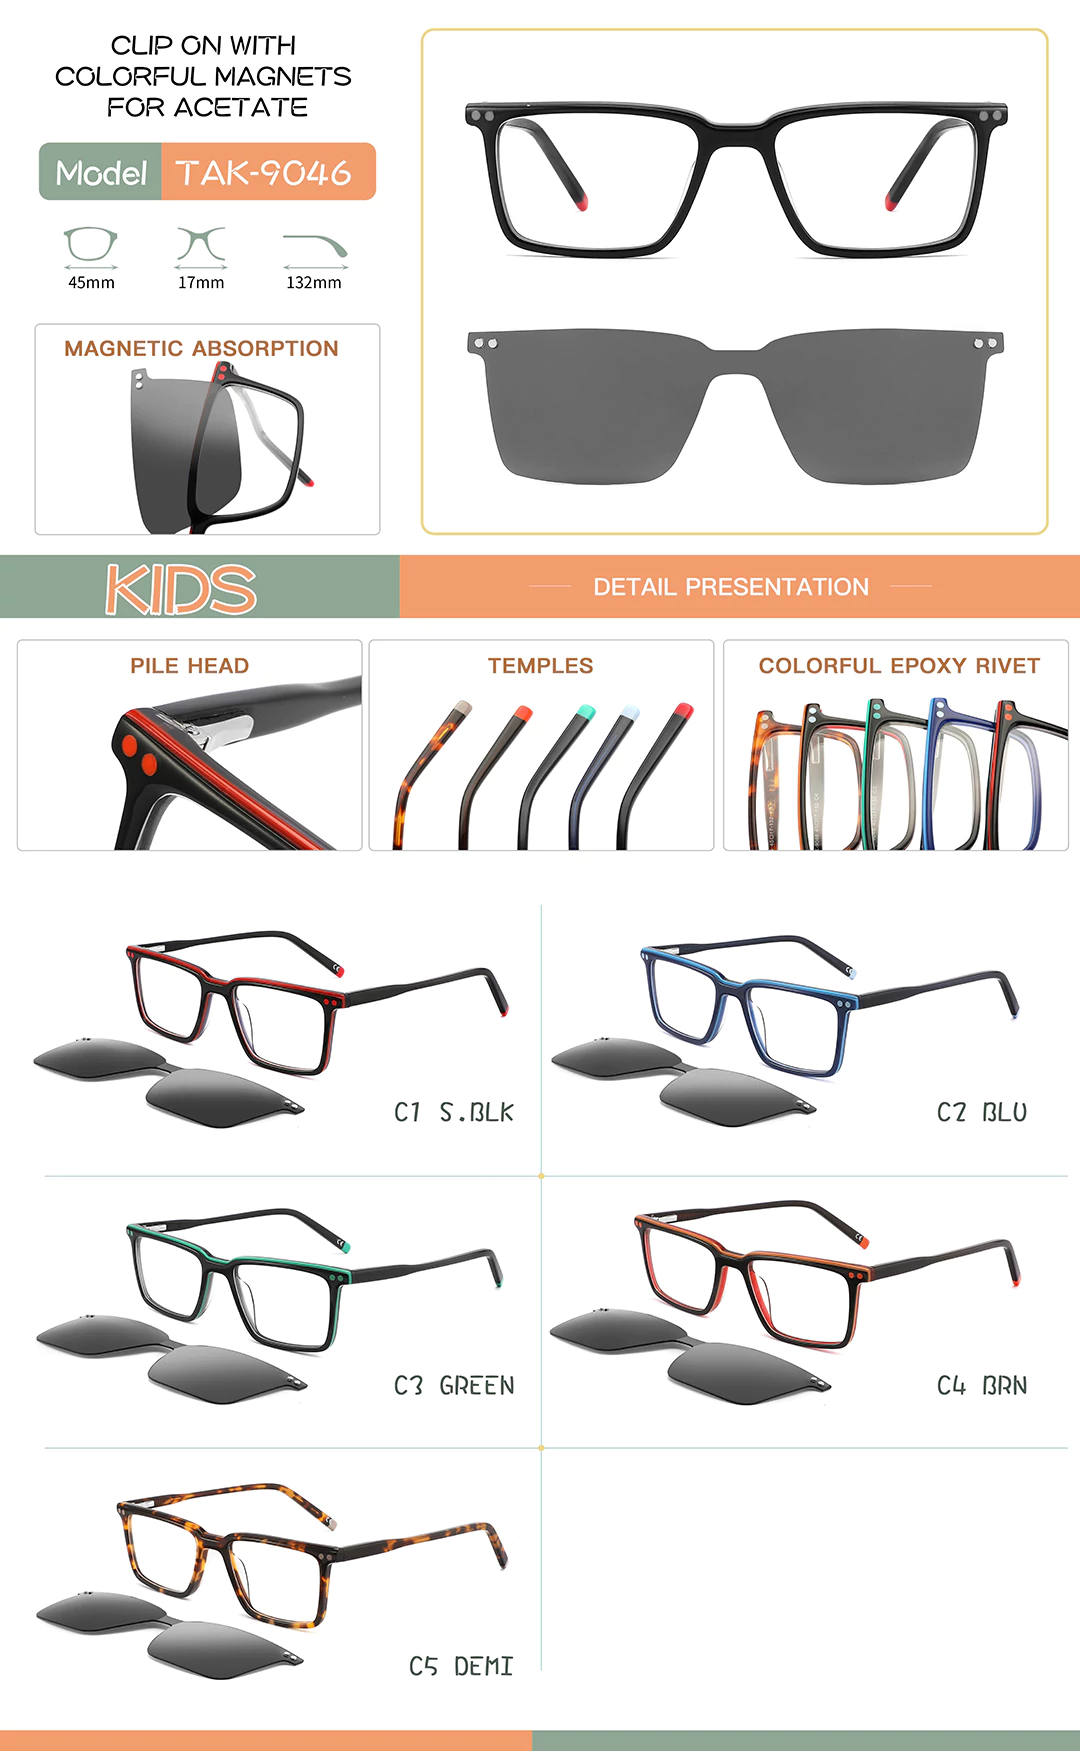 Clip-on eyeglasses TAK9046 in different colors, sizes and detail shots